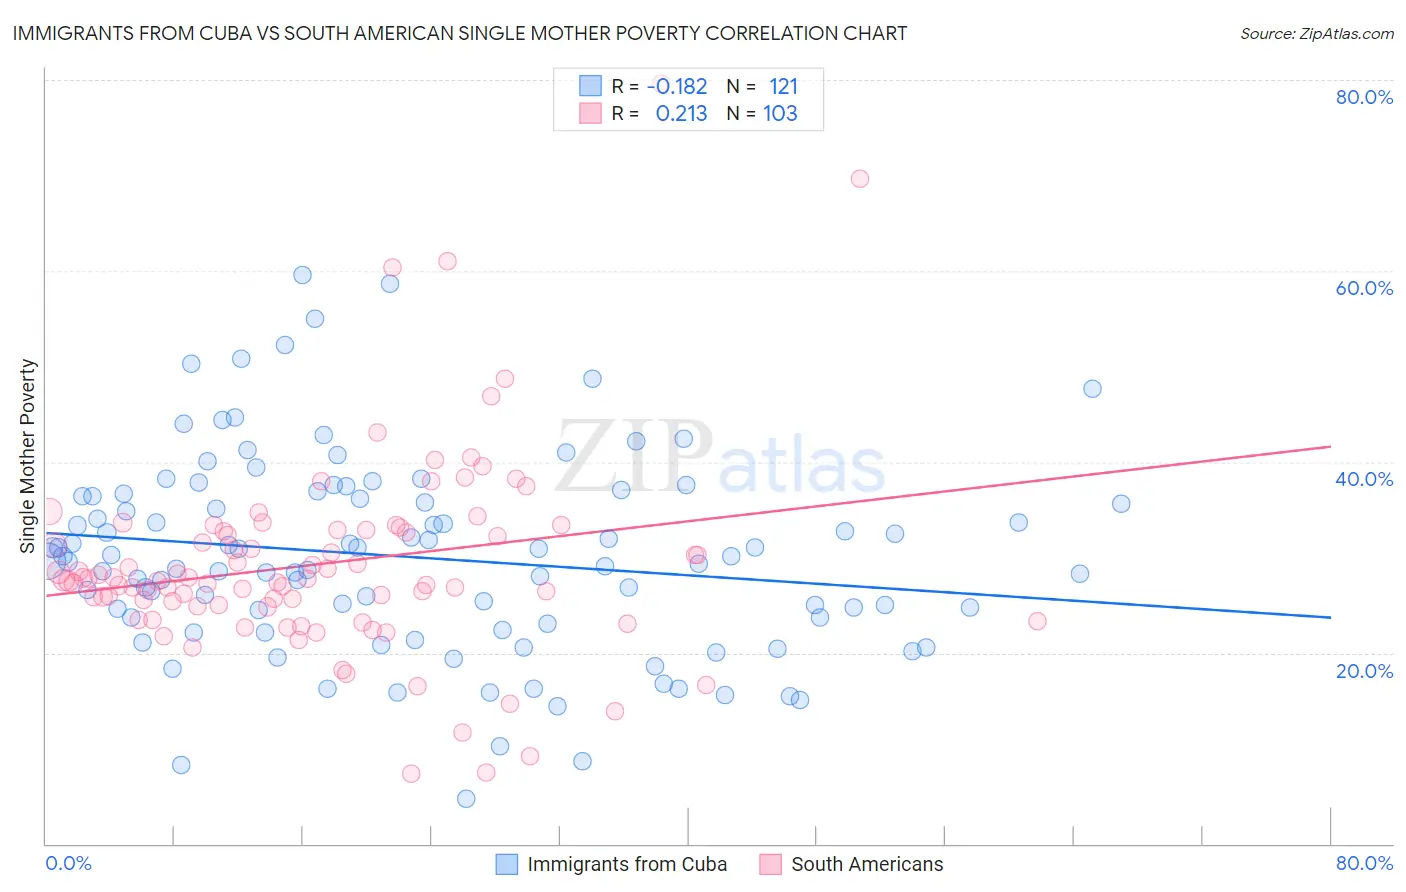 Immigrants from Cuba vs South American Single Mother Poverty